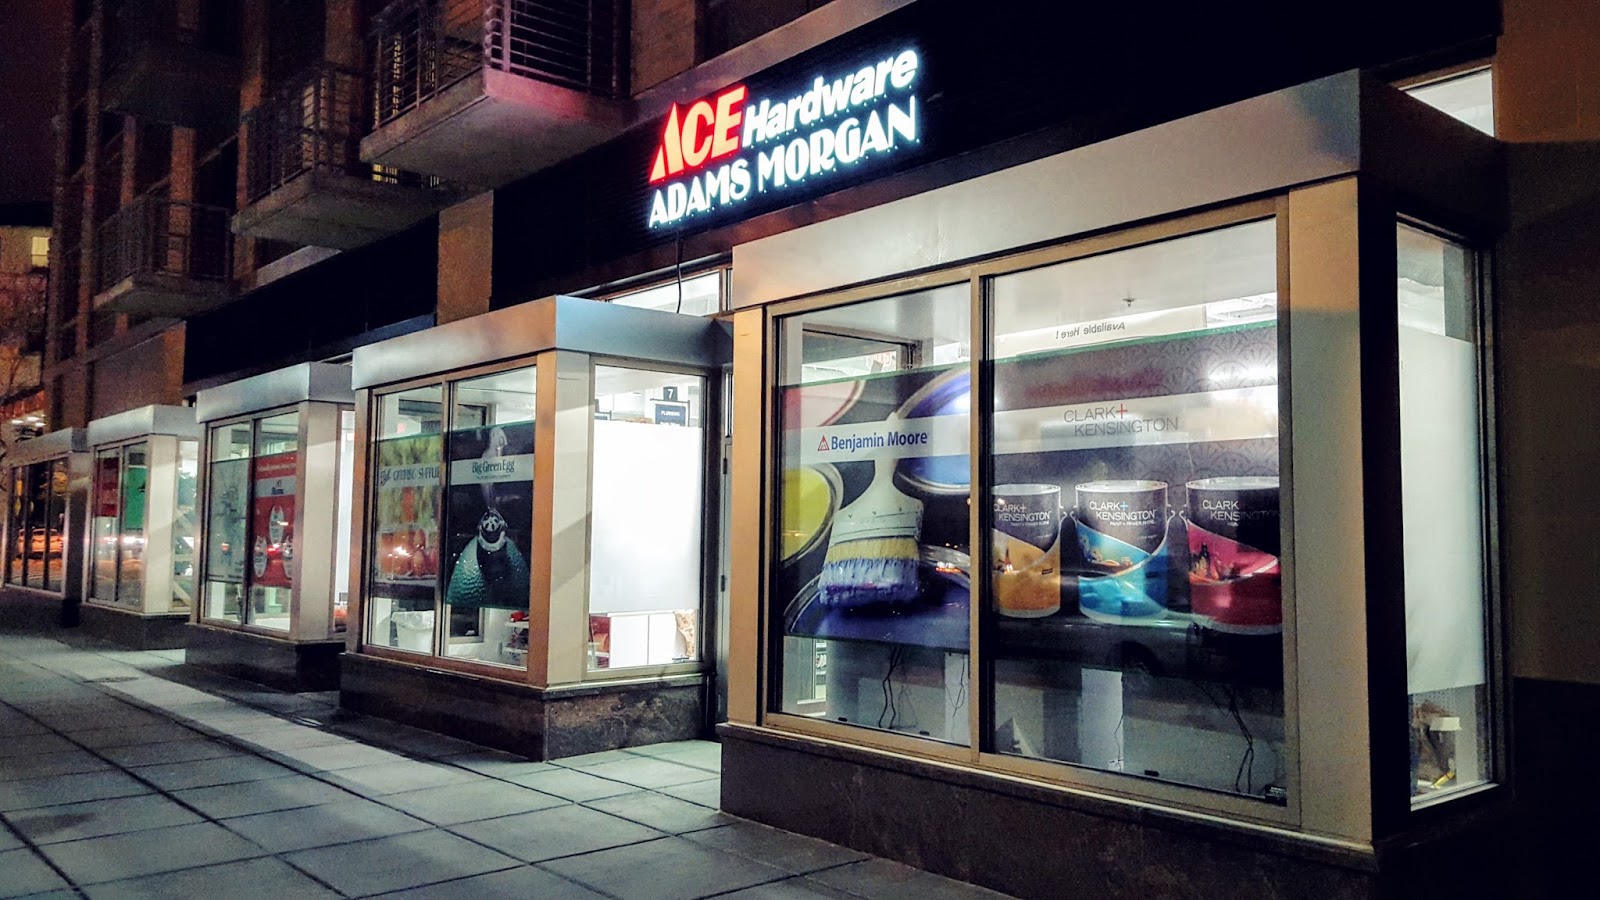 The 42 Ace Hardware Opens in Adams